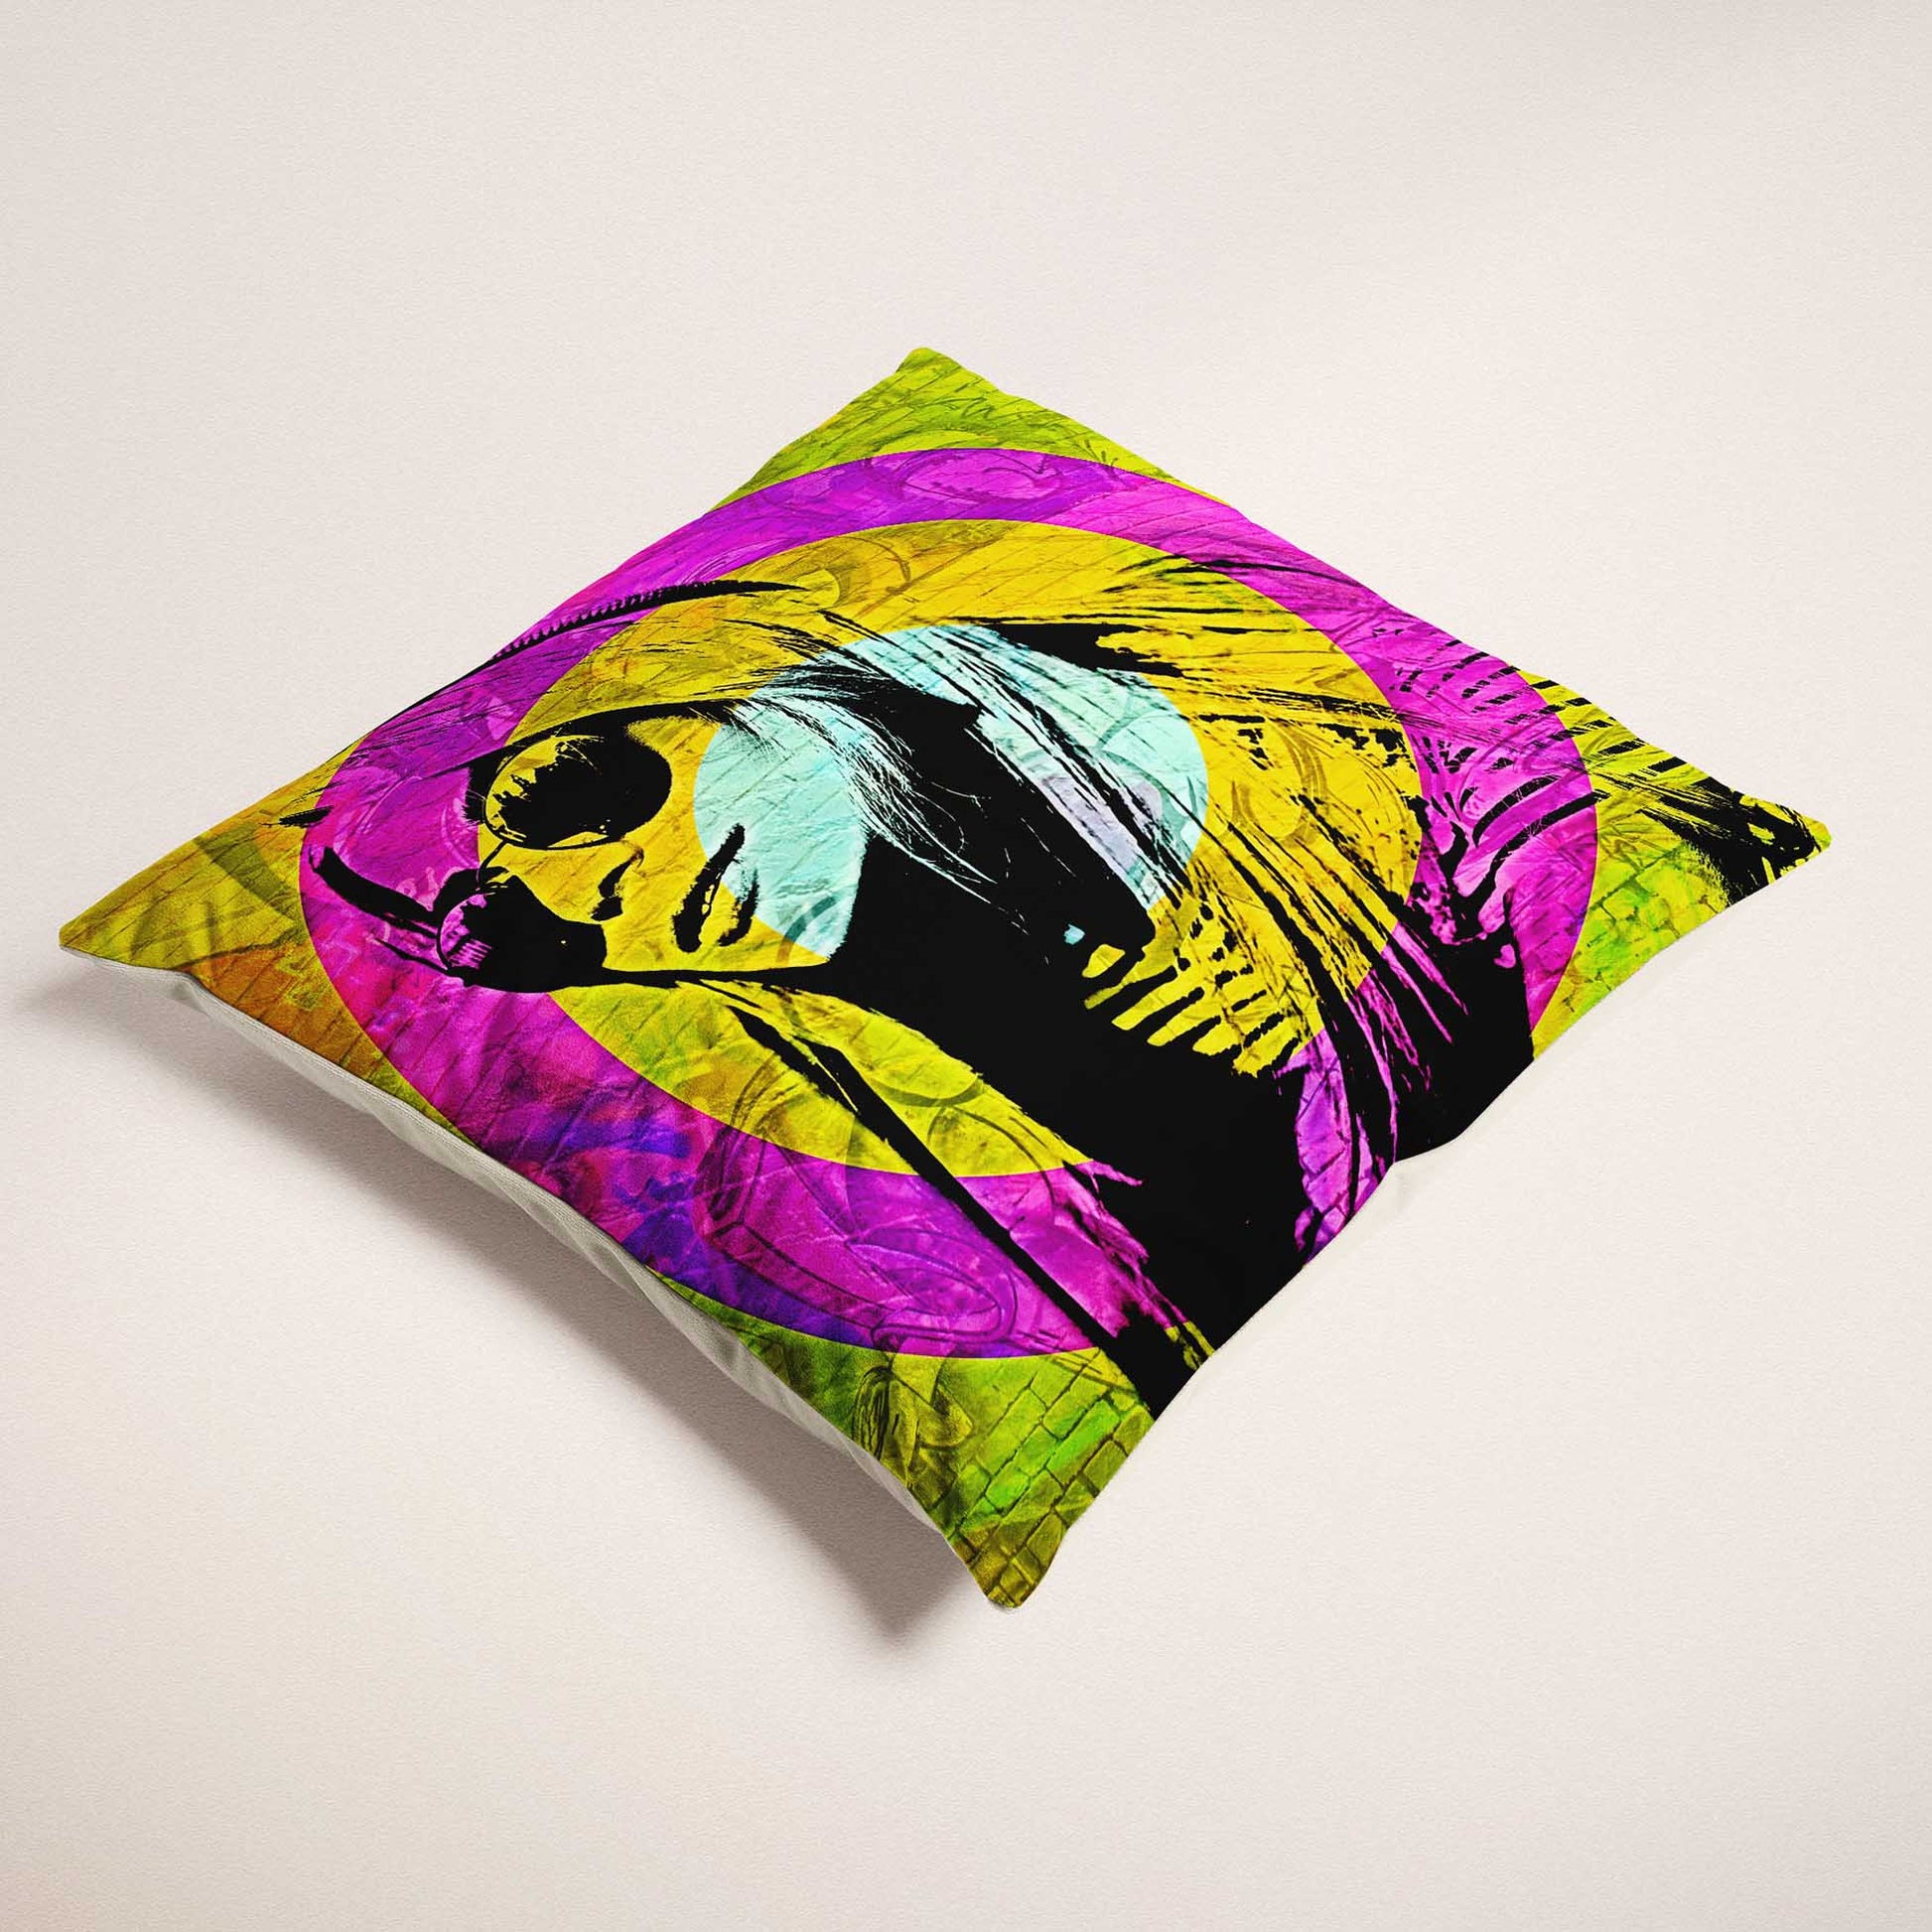 Experience the lively and vibrant world of urban street art with the Personalised Graffiti Street Art Cushion. Its vivid and colorful print, created from your photo, brings a unique and creative touch to your home decor, luxury feel